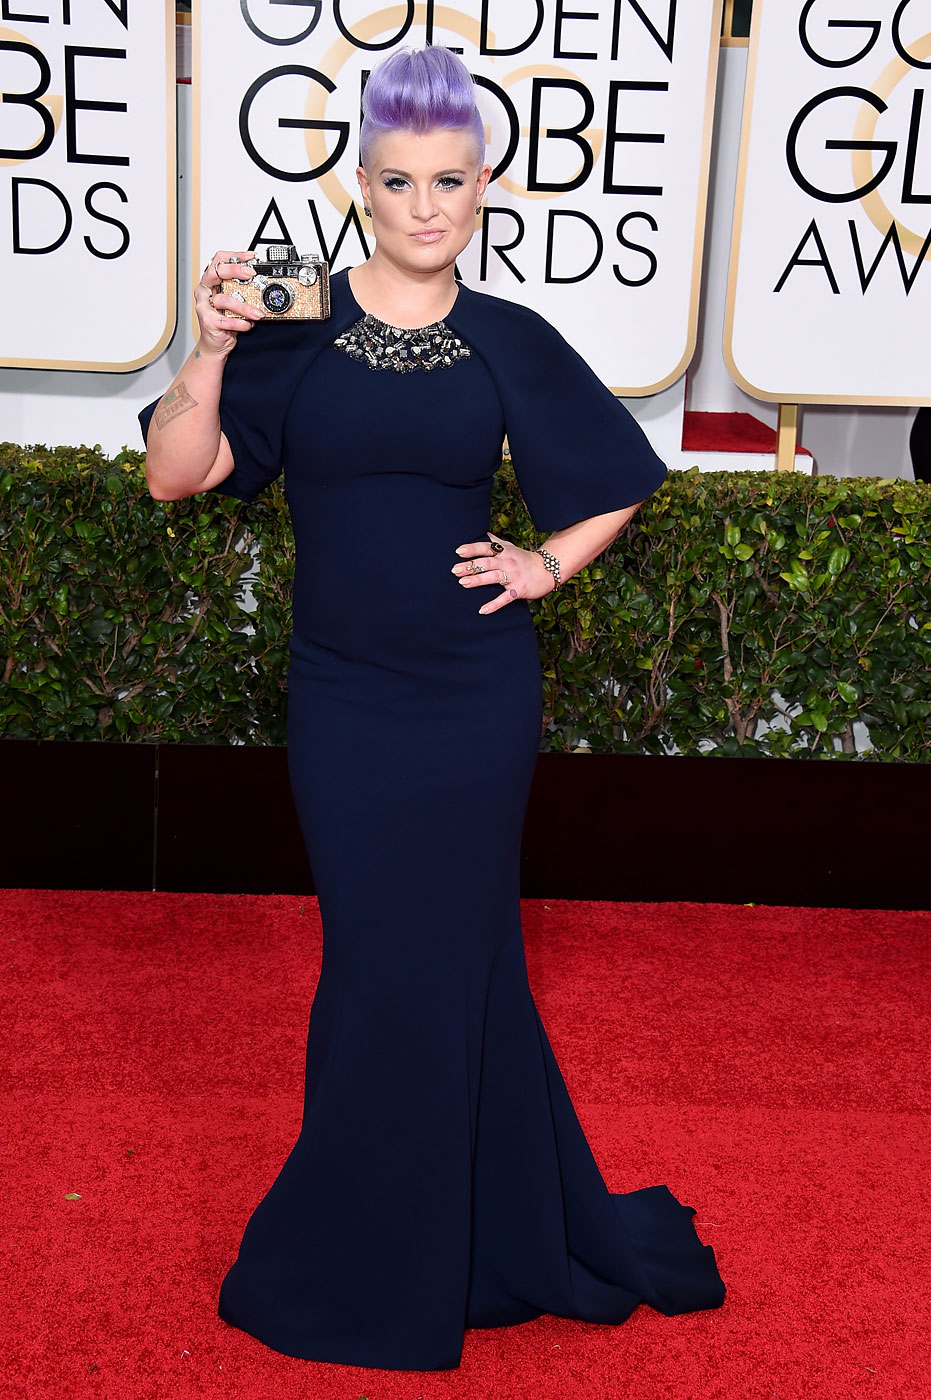 Kelly Osbourne attends the 72nd Annual Golden Globe Awards at The Beverly Hilton Hotel on Jan. 11, 2015 in Beverly Hills, Calif.